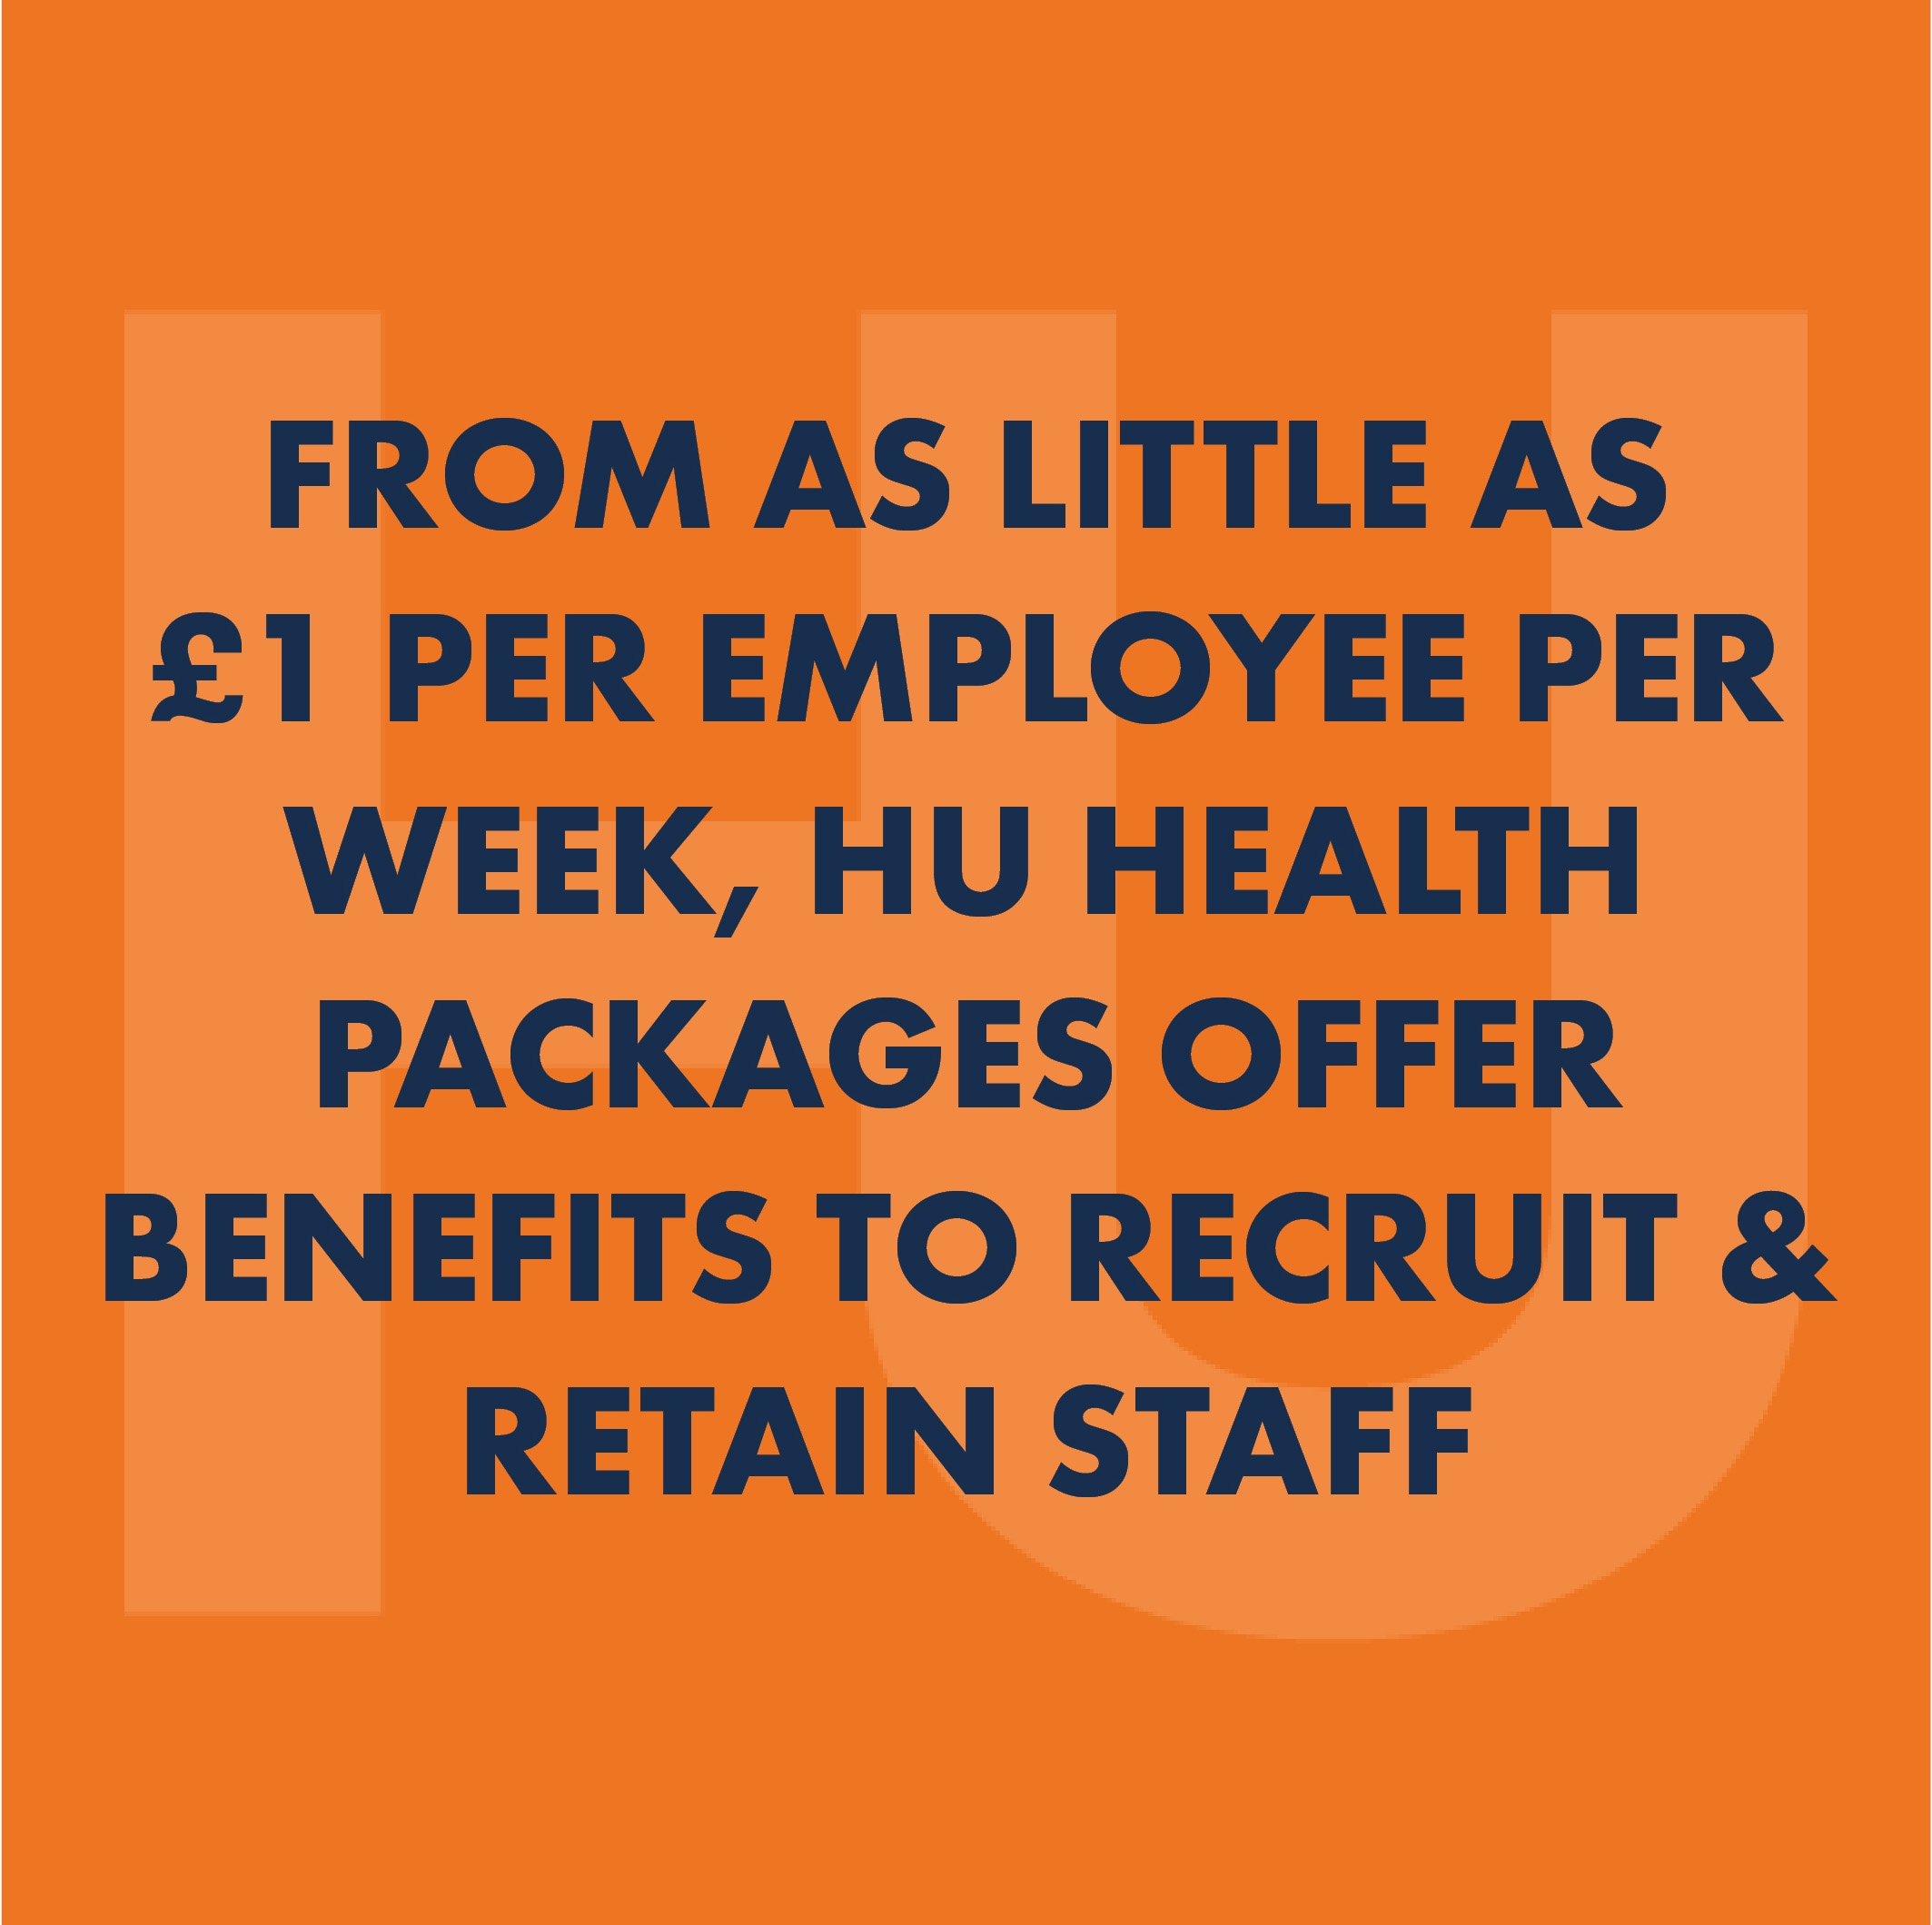 HU HEALTH PACKAGES - BENEFITS TO RECRUIT AND RETAIN STAFF